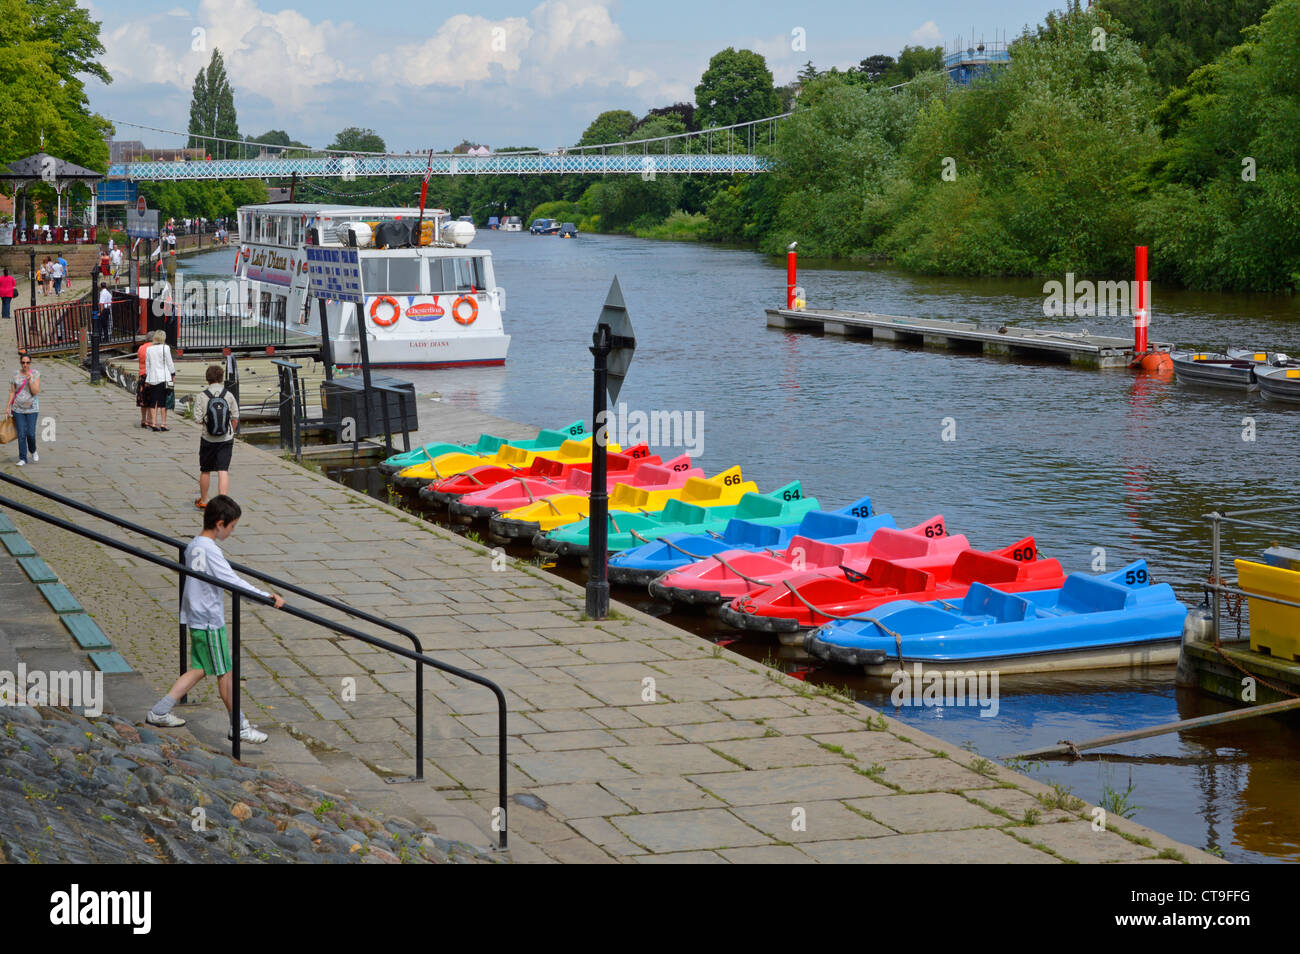 Summer view of white sightseeing tour boat on the River Dee at Chester colourful peddle boats at riverside moorings suspension bridge Cheshire England Stock Photo